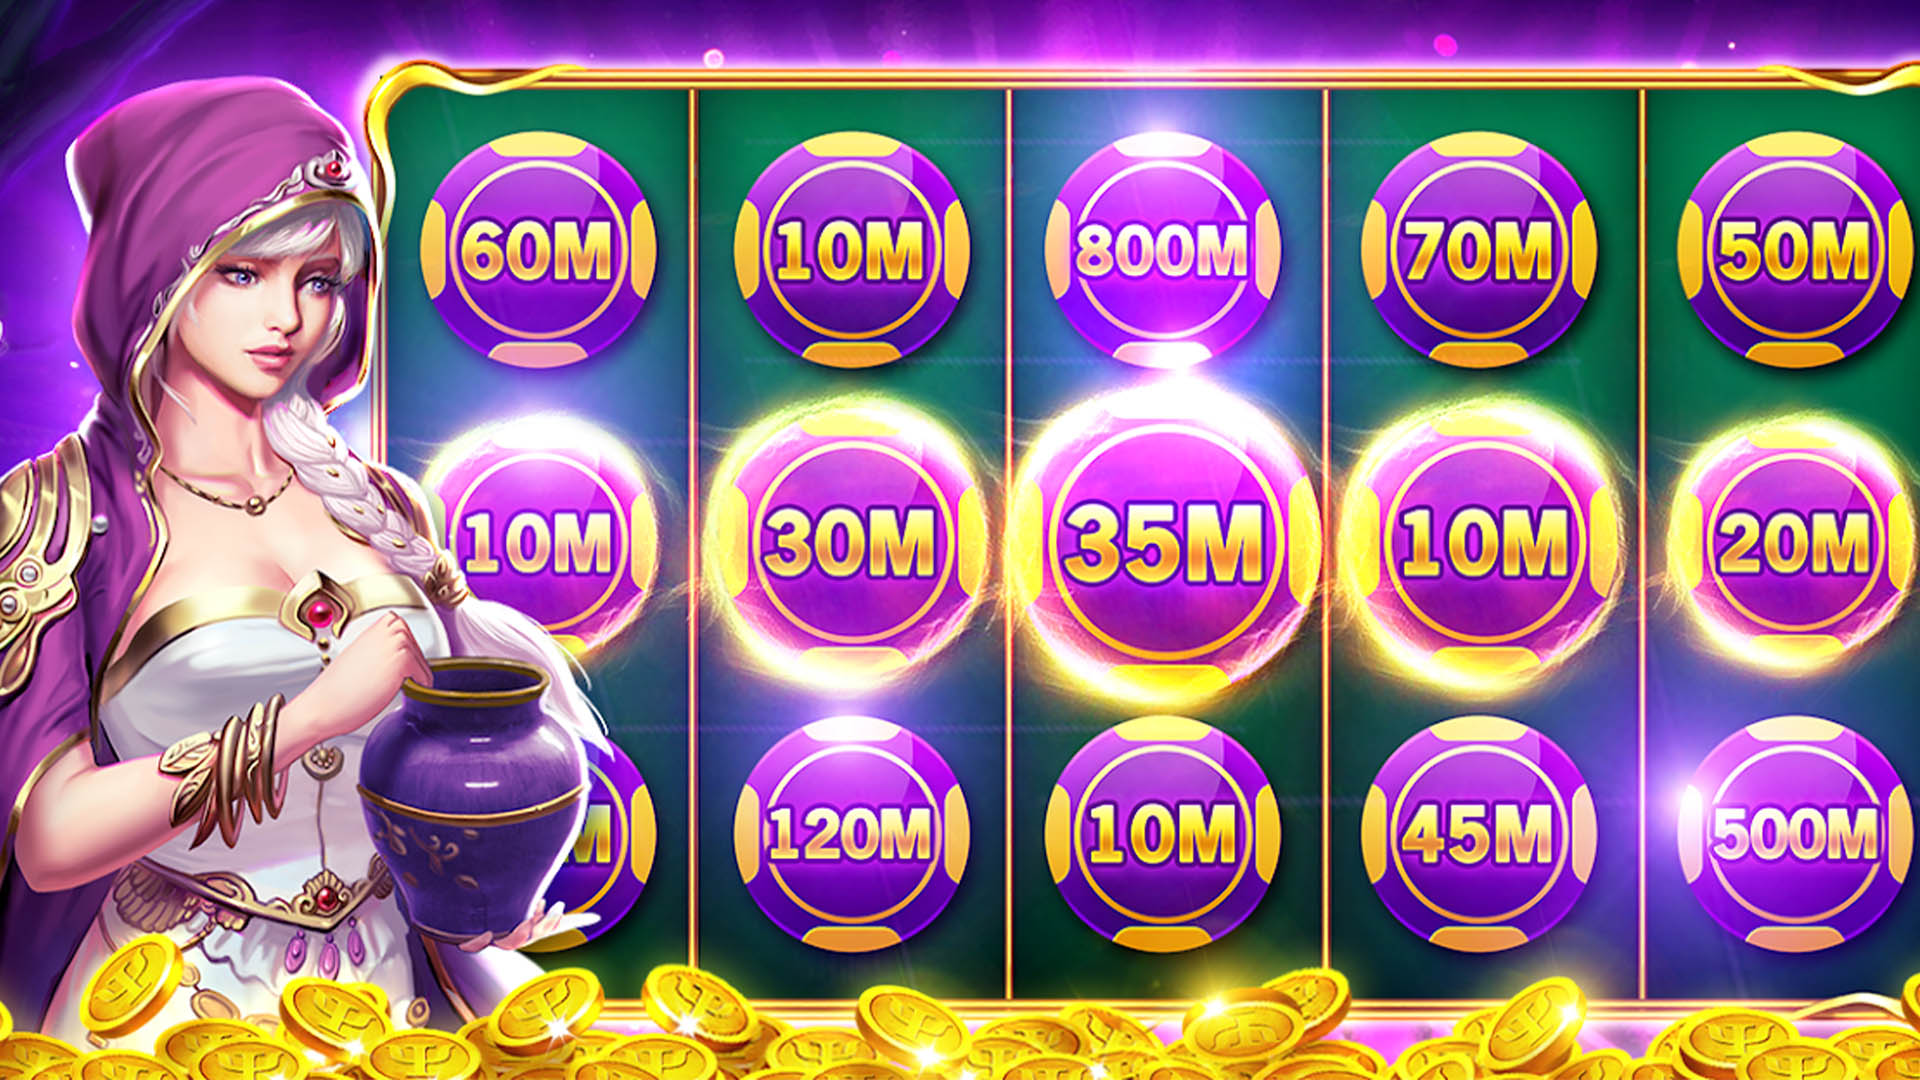 Signs You Made A Great Impact On free spins bonuses